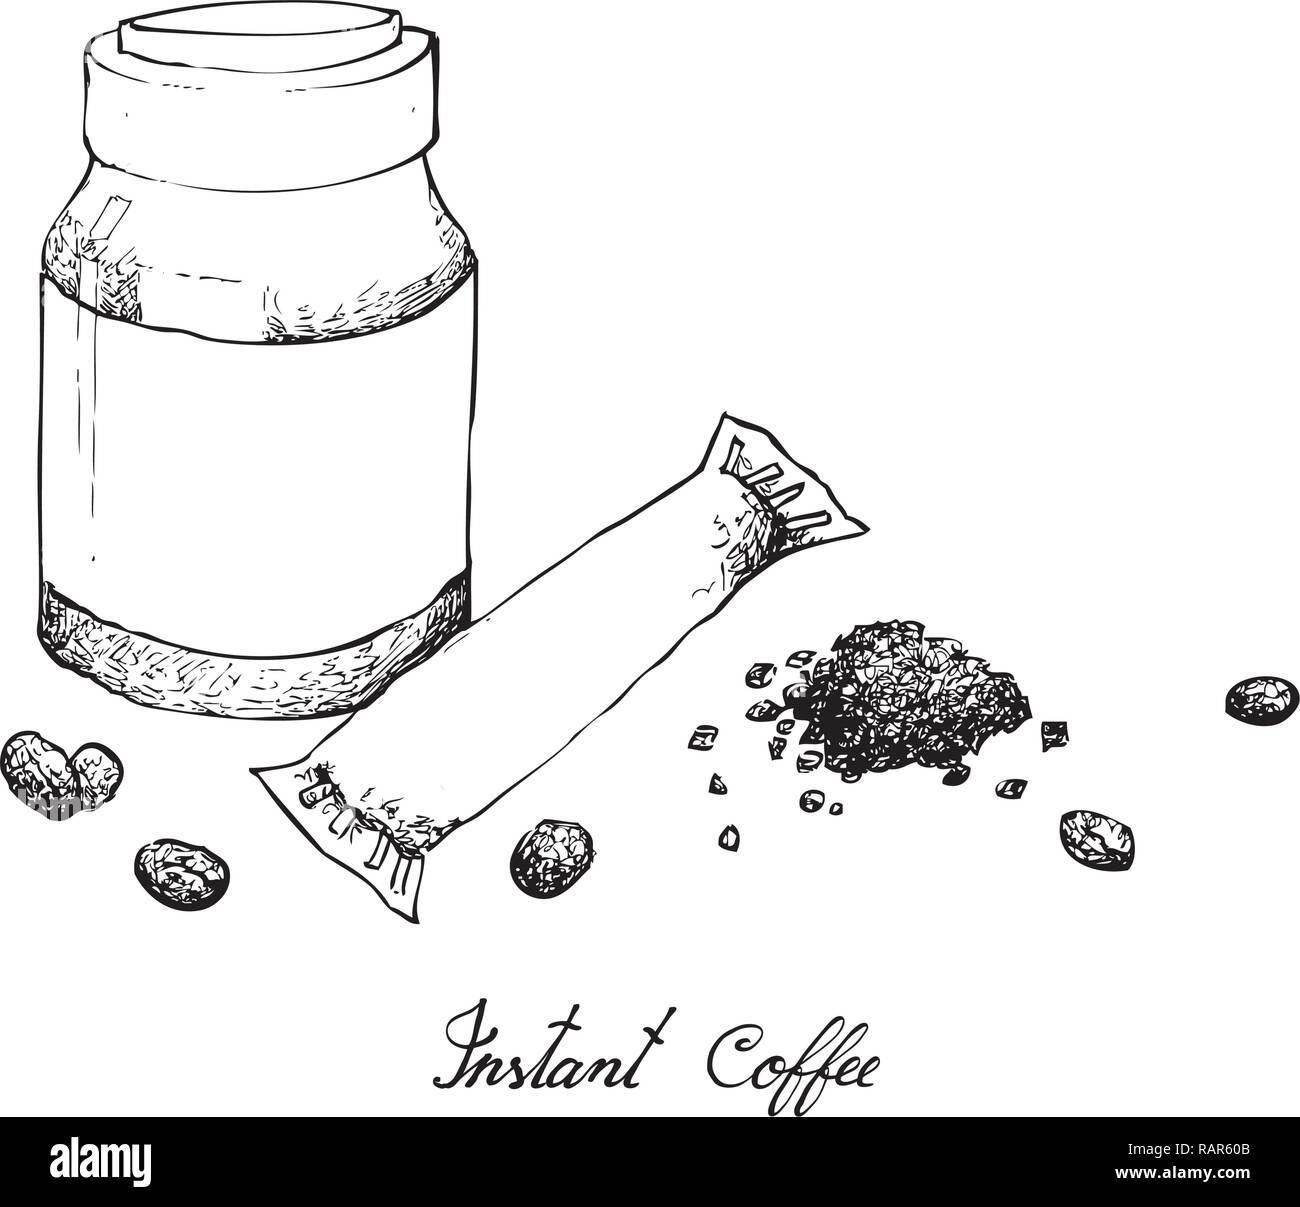 Coffee Drawing Images | Free Photos, PNG Stickers, Wallpapers & Backgrounds  - rawpixel